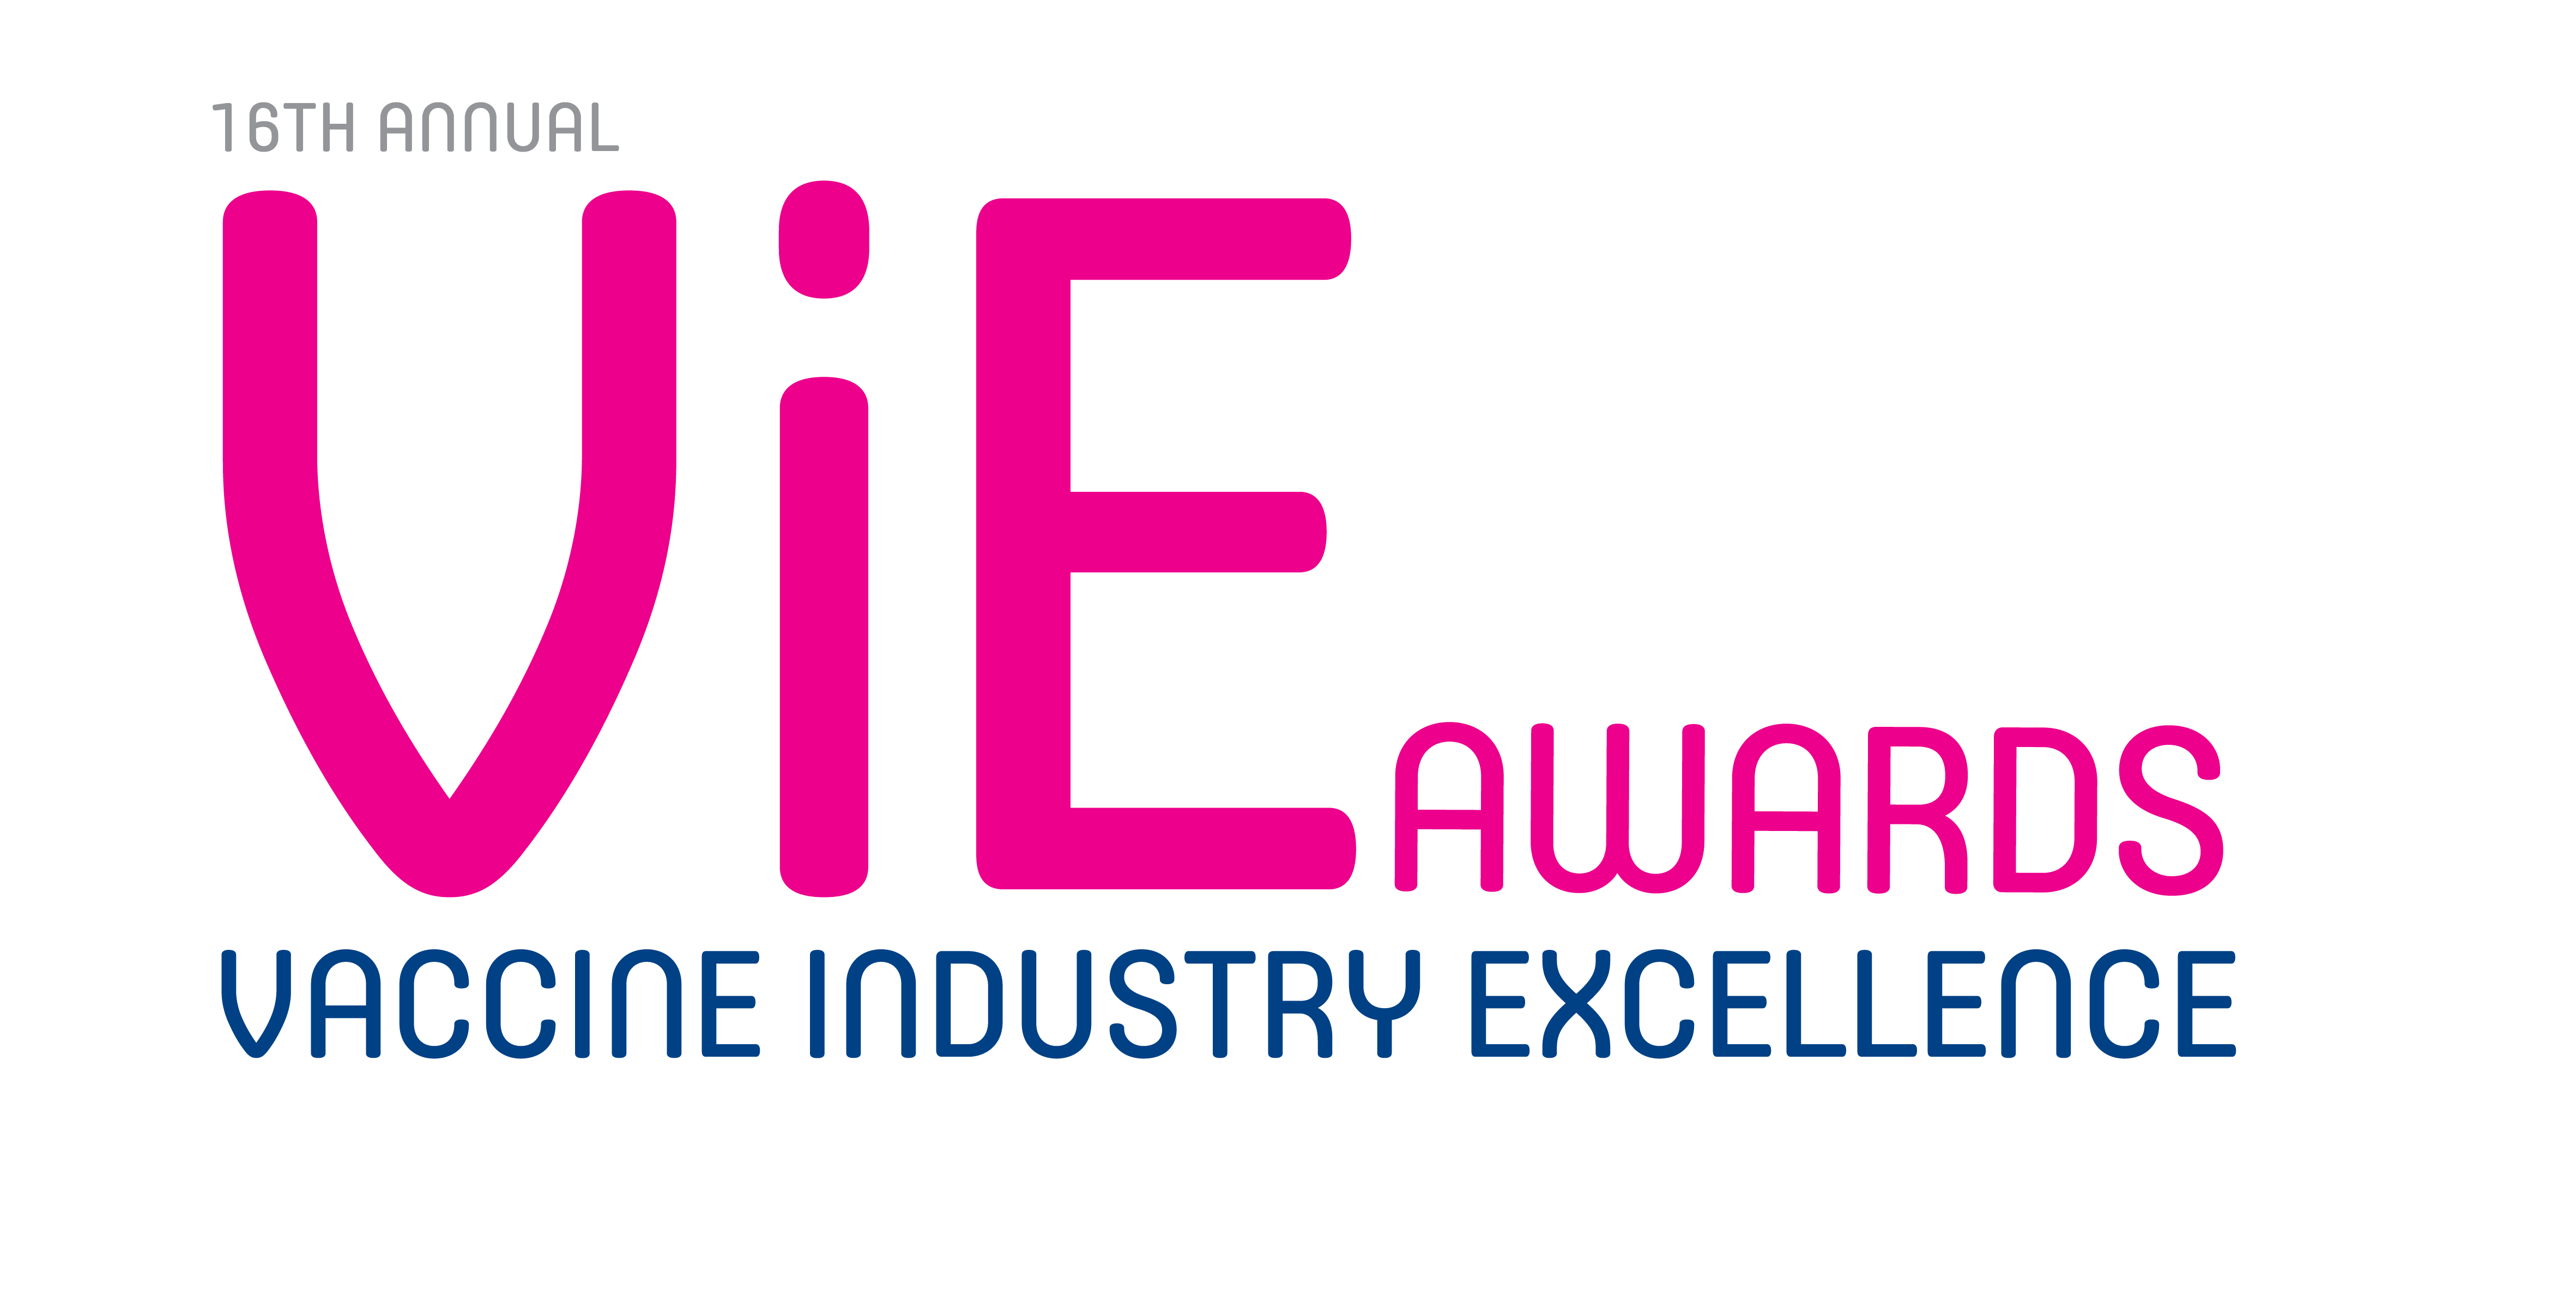 Vaccine Industry Excellence Awards